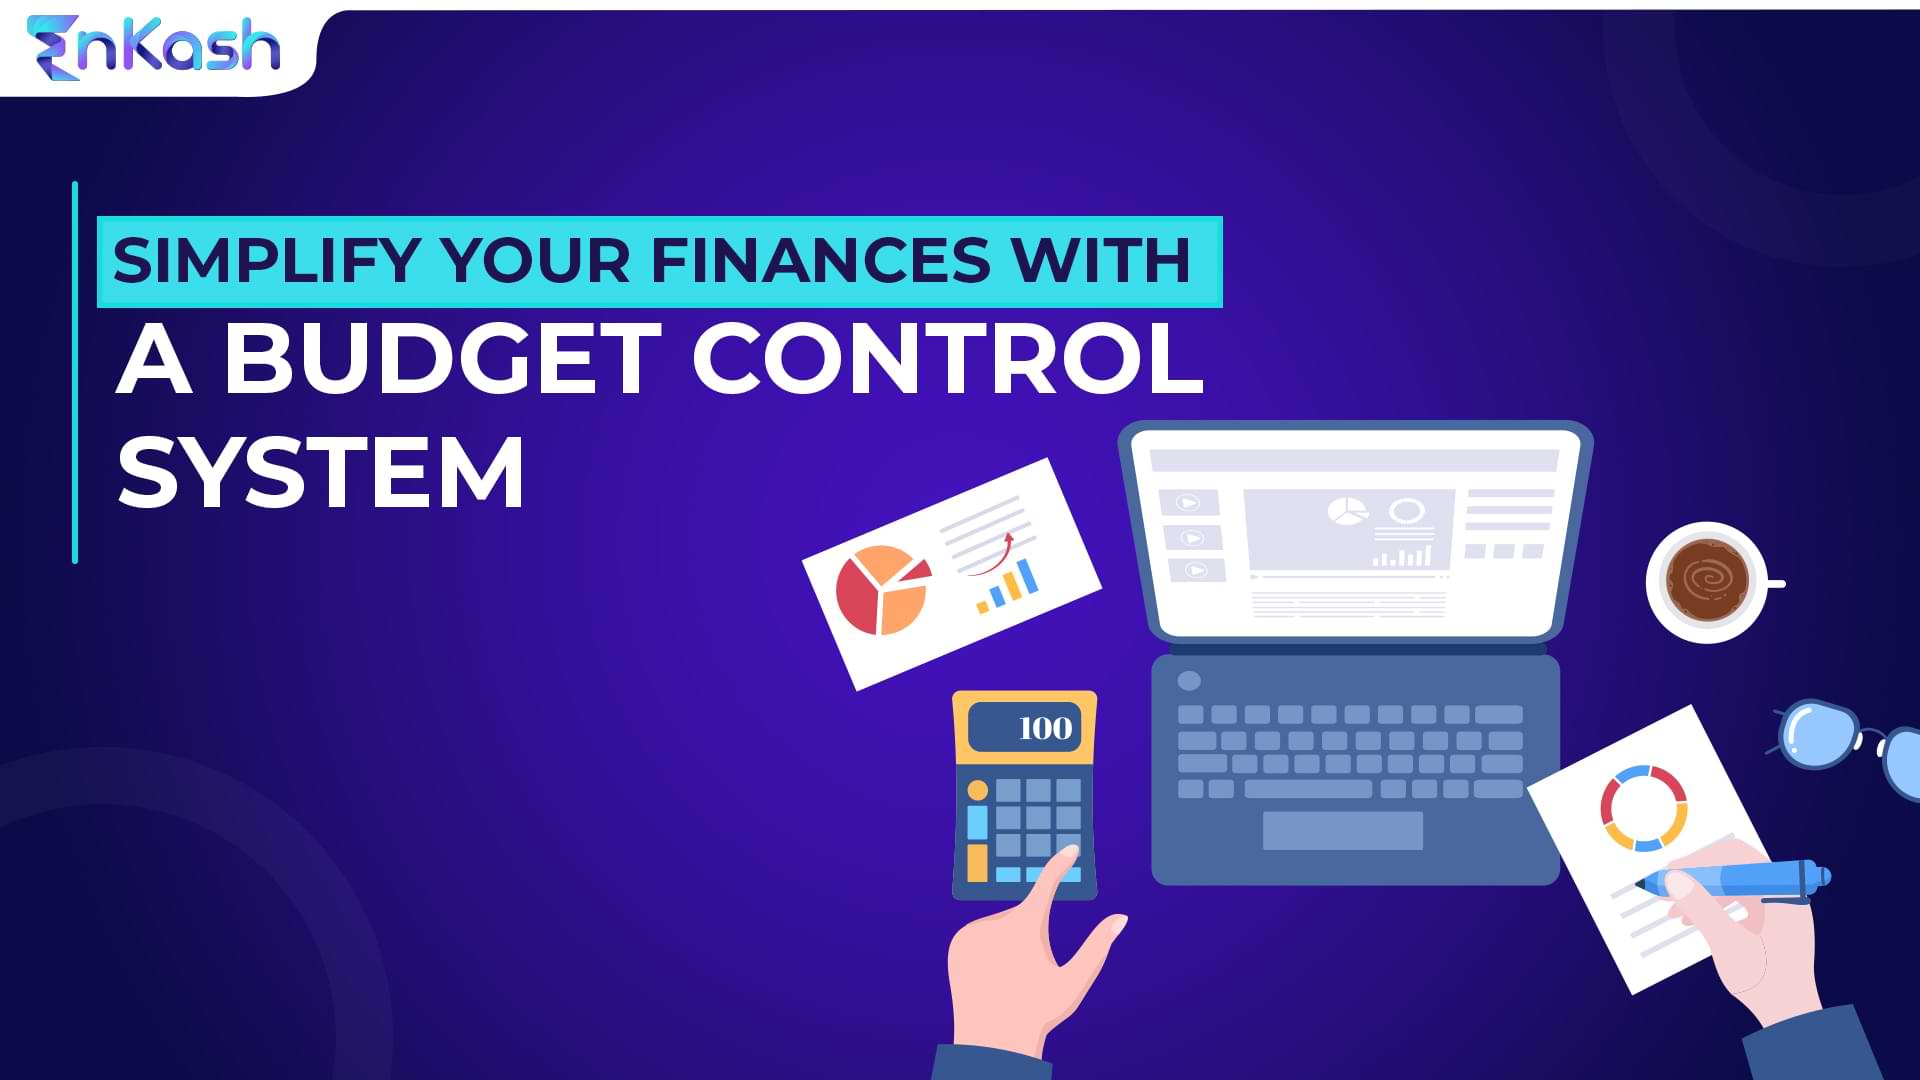 Simplify Your Finances with a Budget Control System